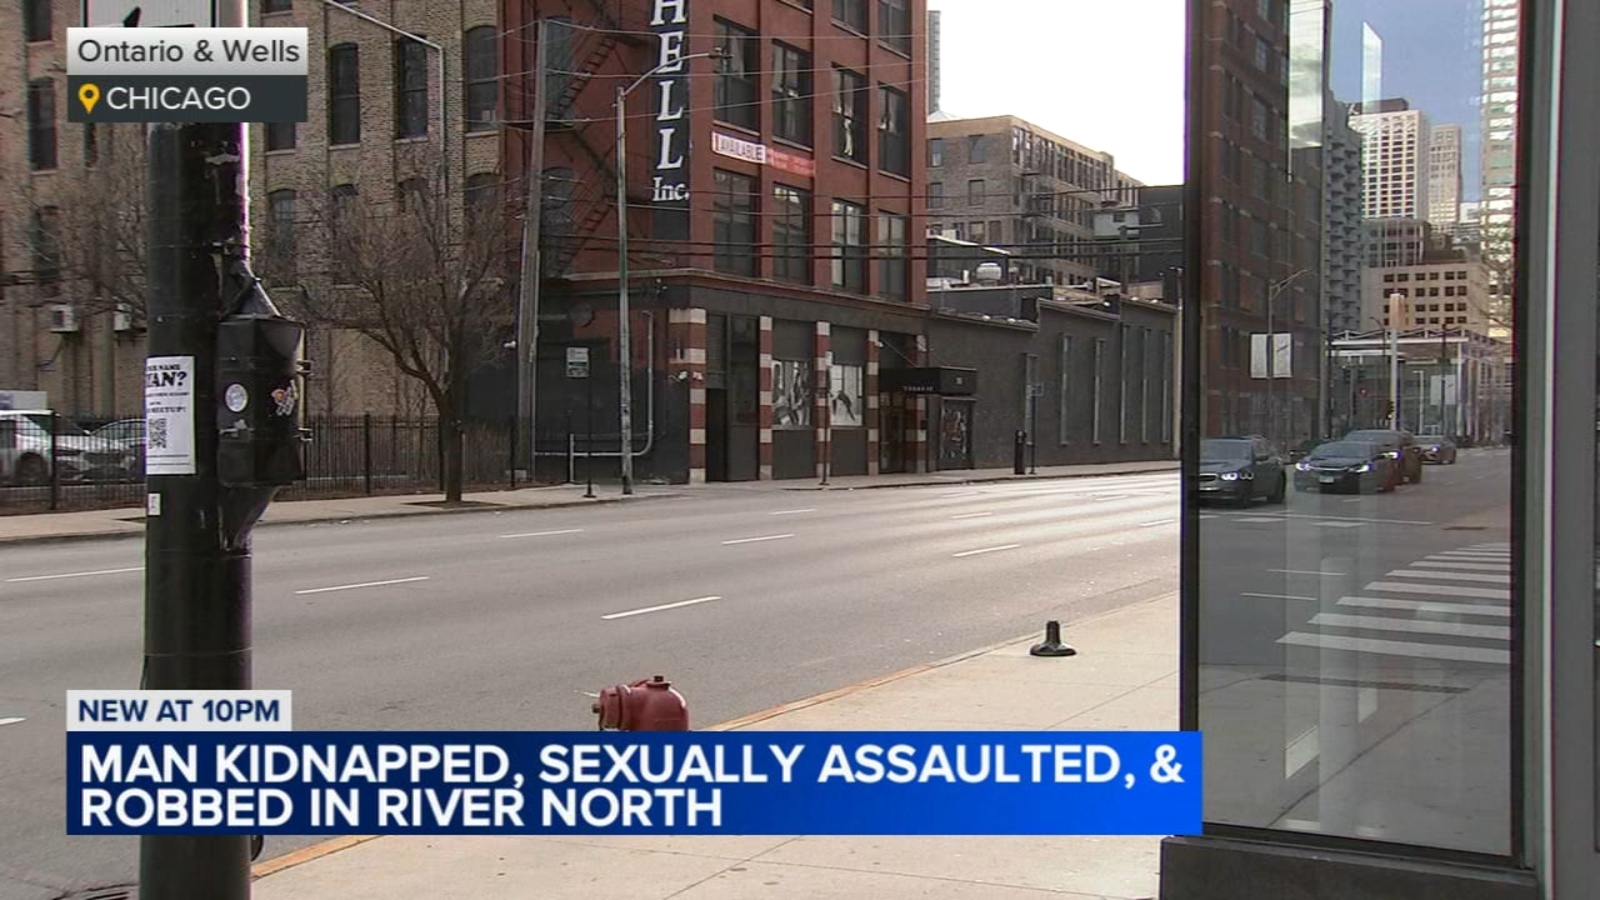 Chicago crime: 21-year-old man kidnapped, sexually assaulted, robbed in River North on East Ontario Street, police say [Video]